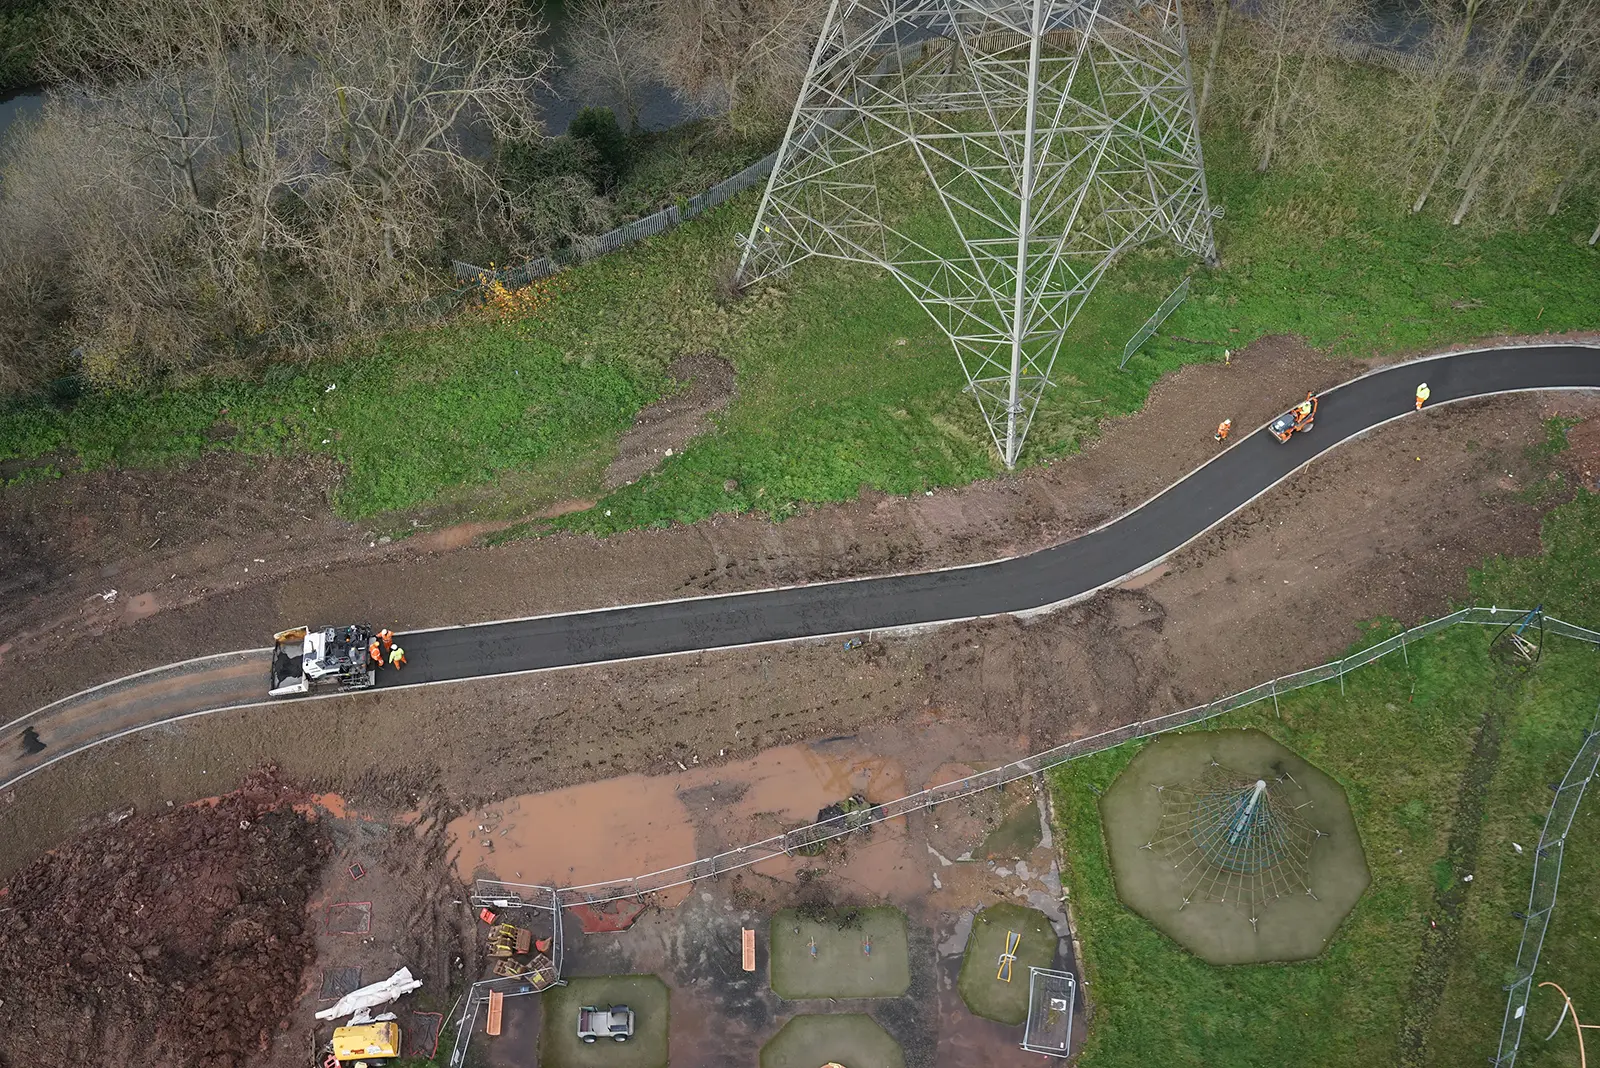  An aerial view of the low carbon asphalt cycle path at Bromford.